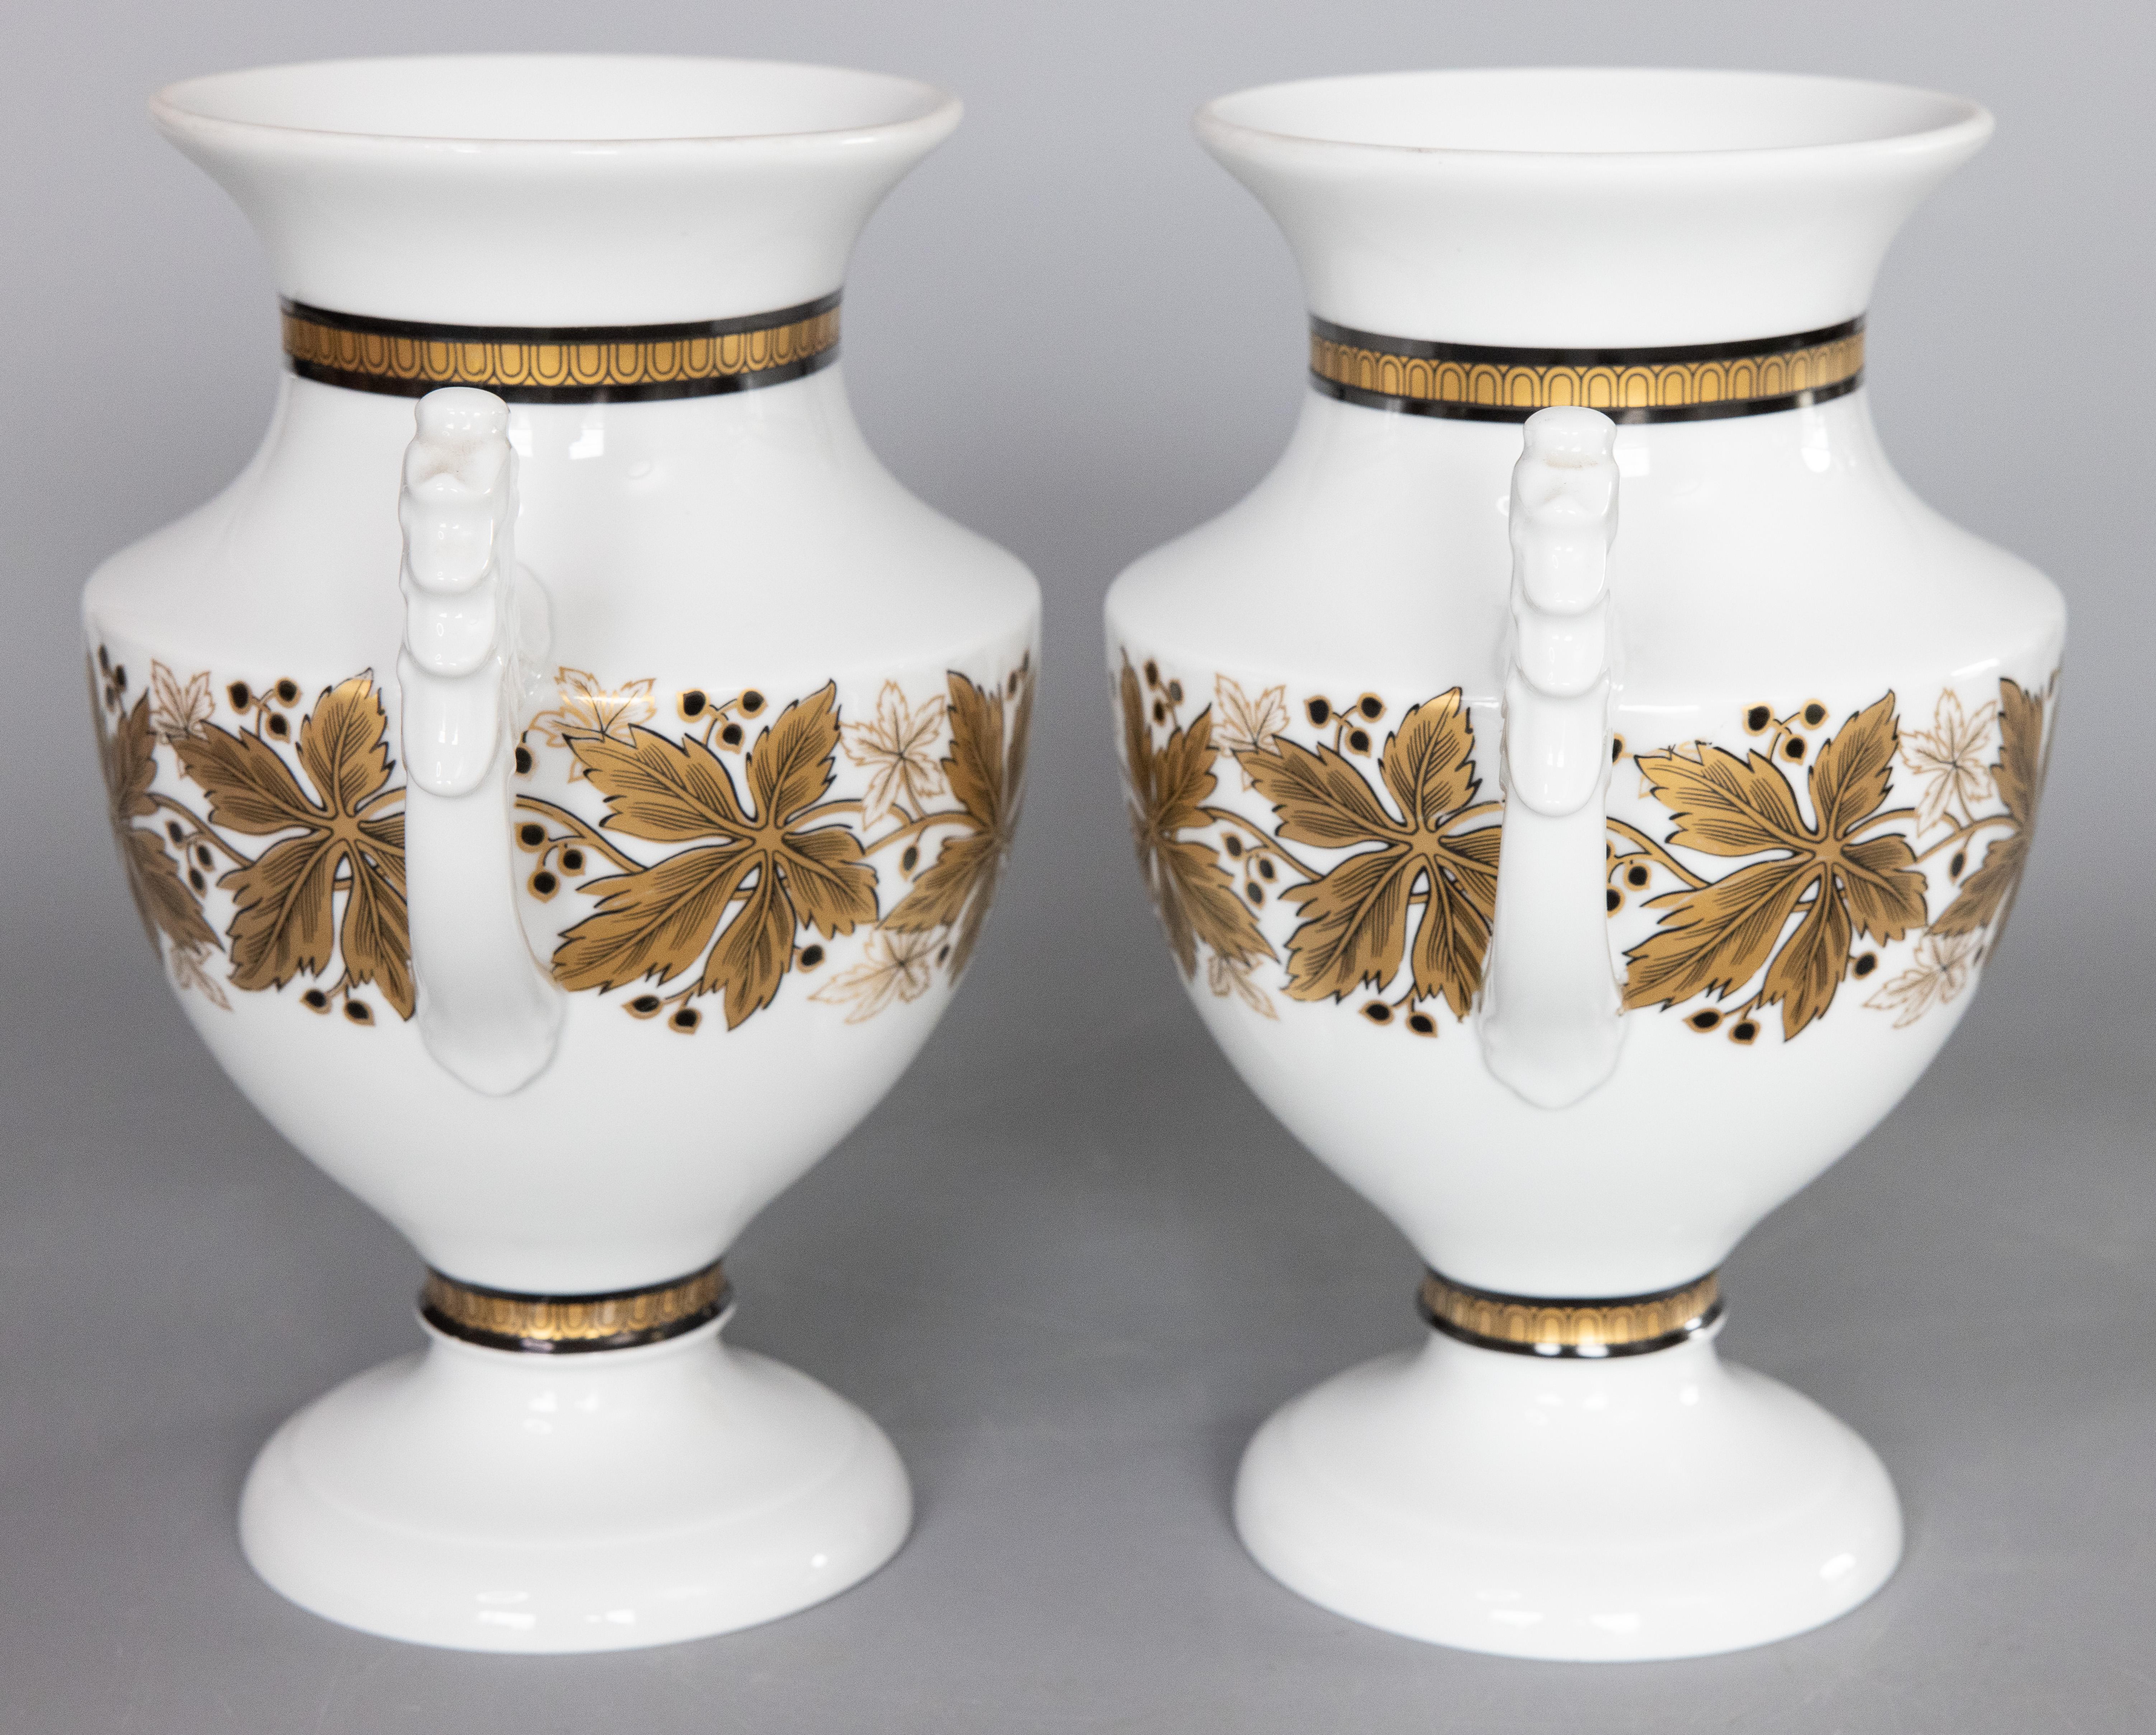 A lovely pair of vintage German porcelain white and gold urns or vases from the Royal Tettau Manufactory, circa 1930-1950. Maker's mark on reverse. These gorgeous vases have a stylish Neoclassical design with ornamental eagle handles and gilt leaf